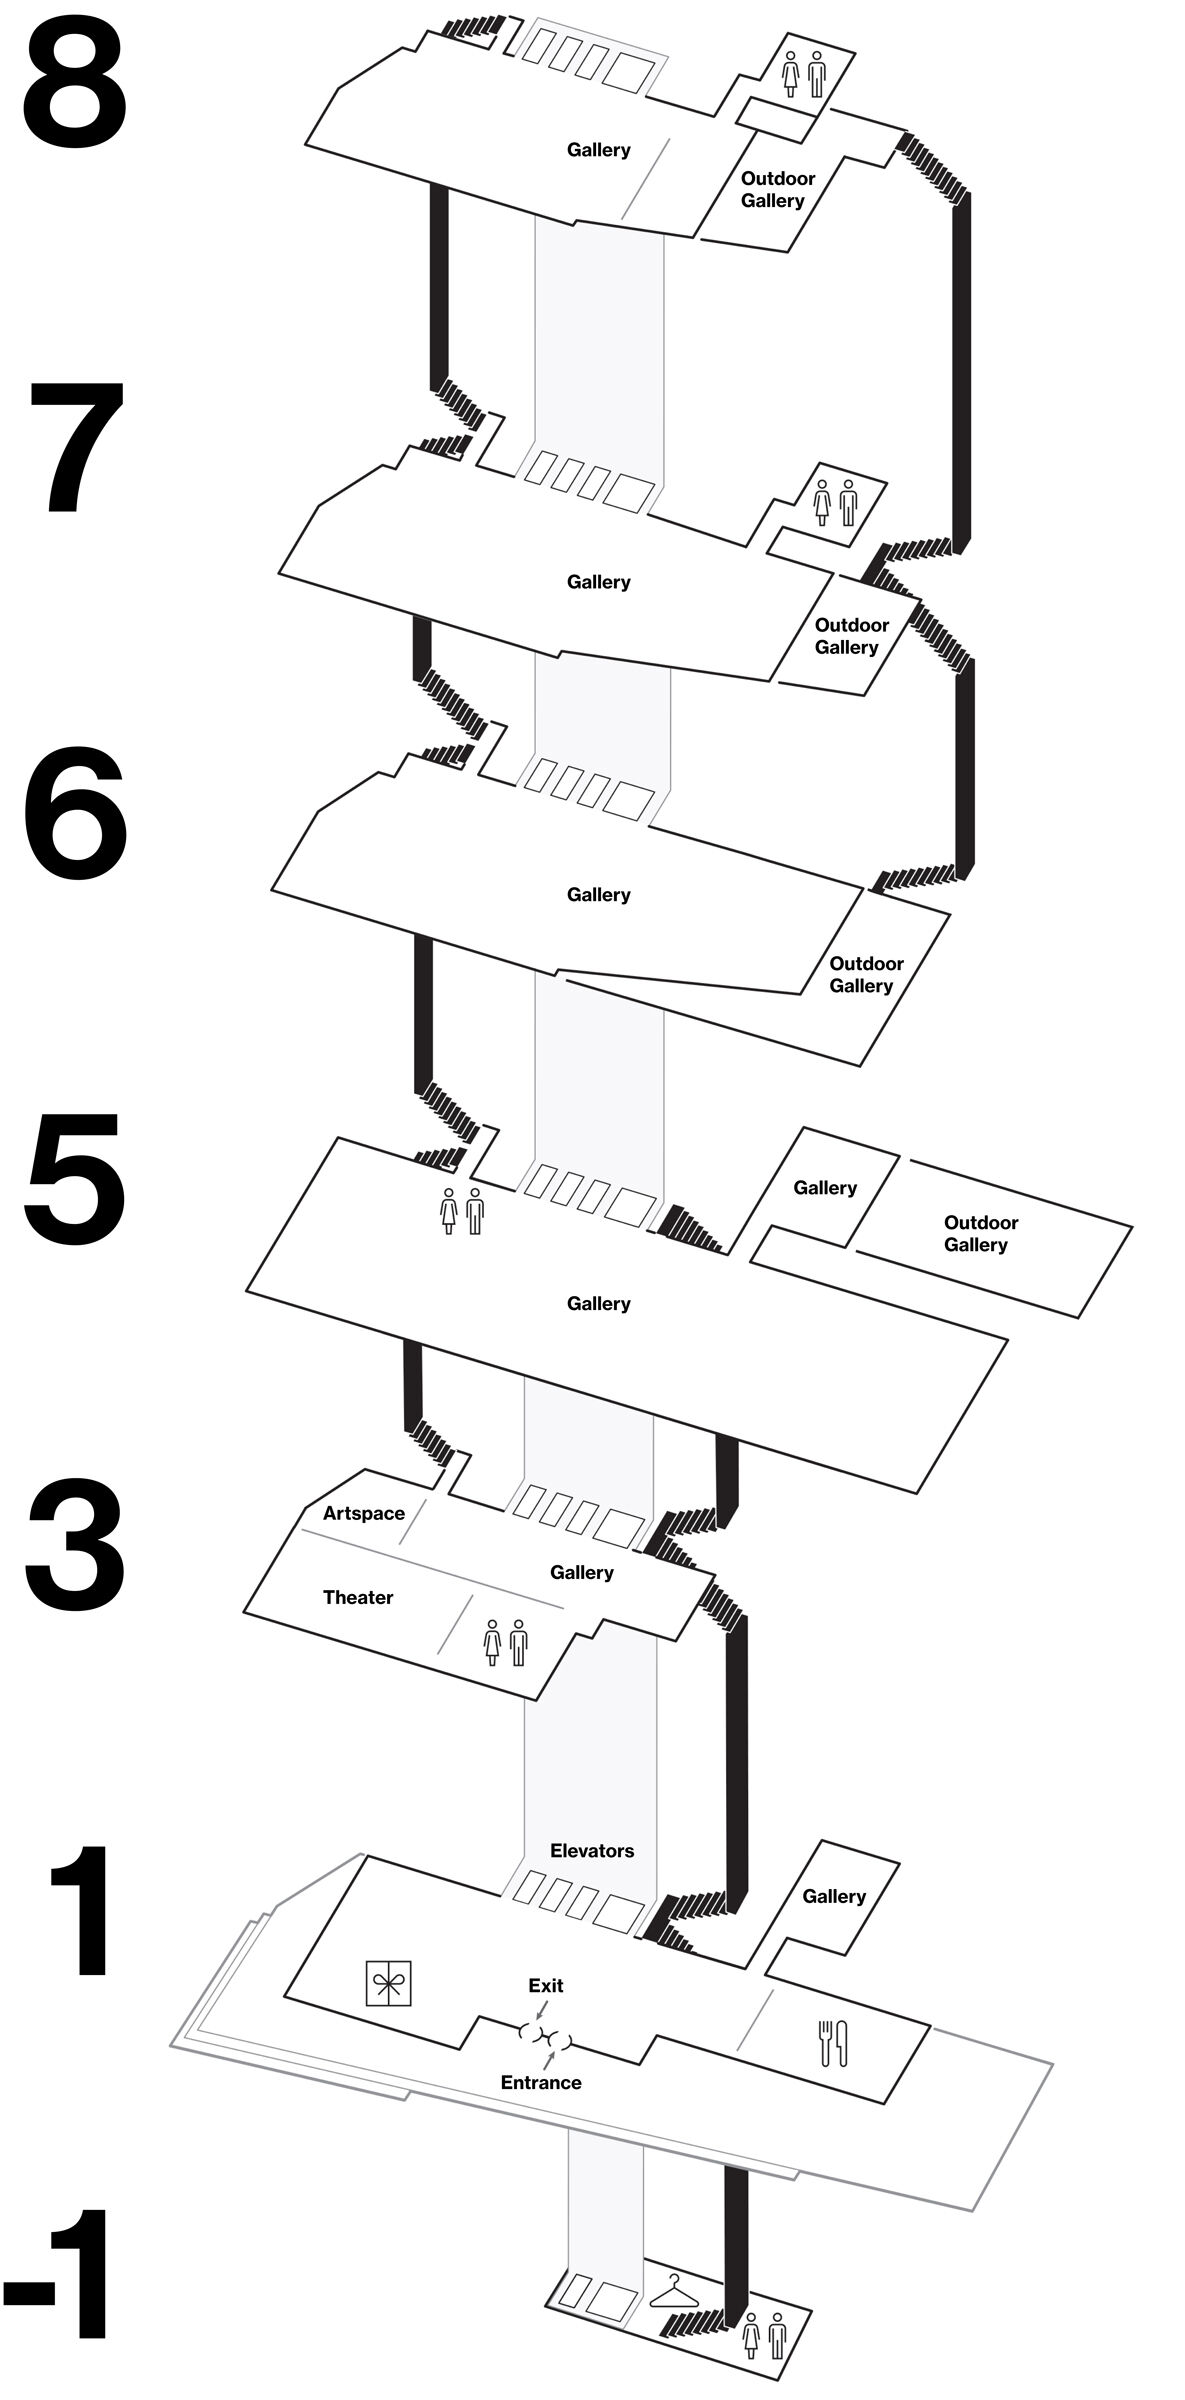 A map displaying all floors of the Whitney Museum. Restrooms are located on Floors: -1, 3, 7, and 8. The lobby and shop are on Floor 1. Galleries are located on Floors: 3, 5, 6, 7, and 8.